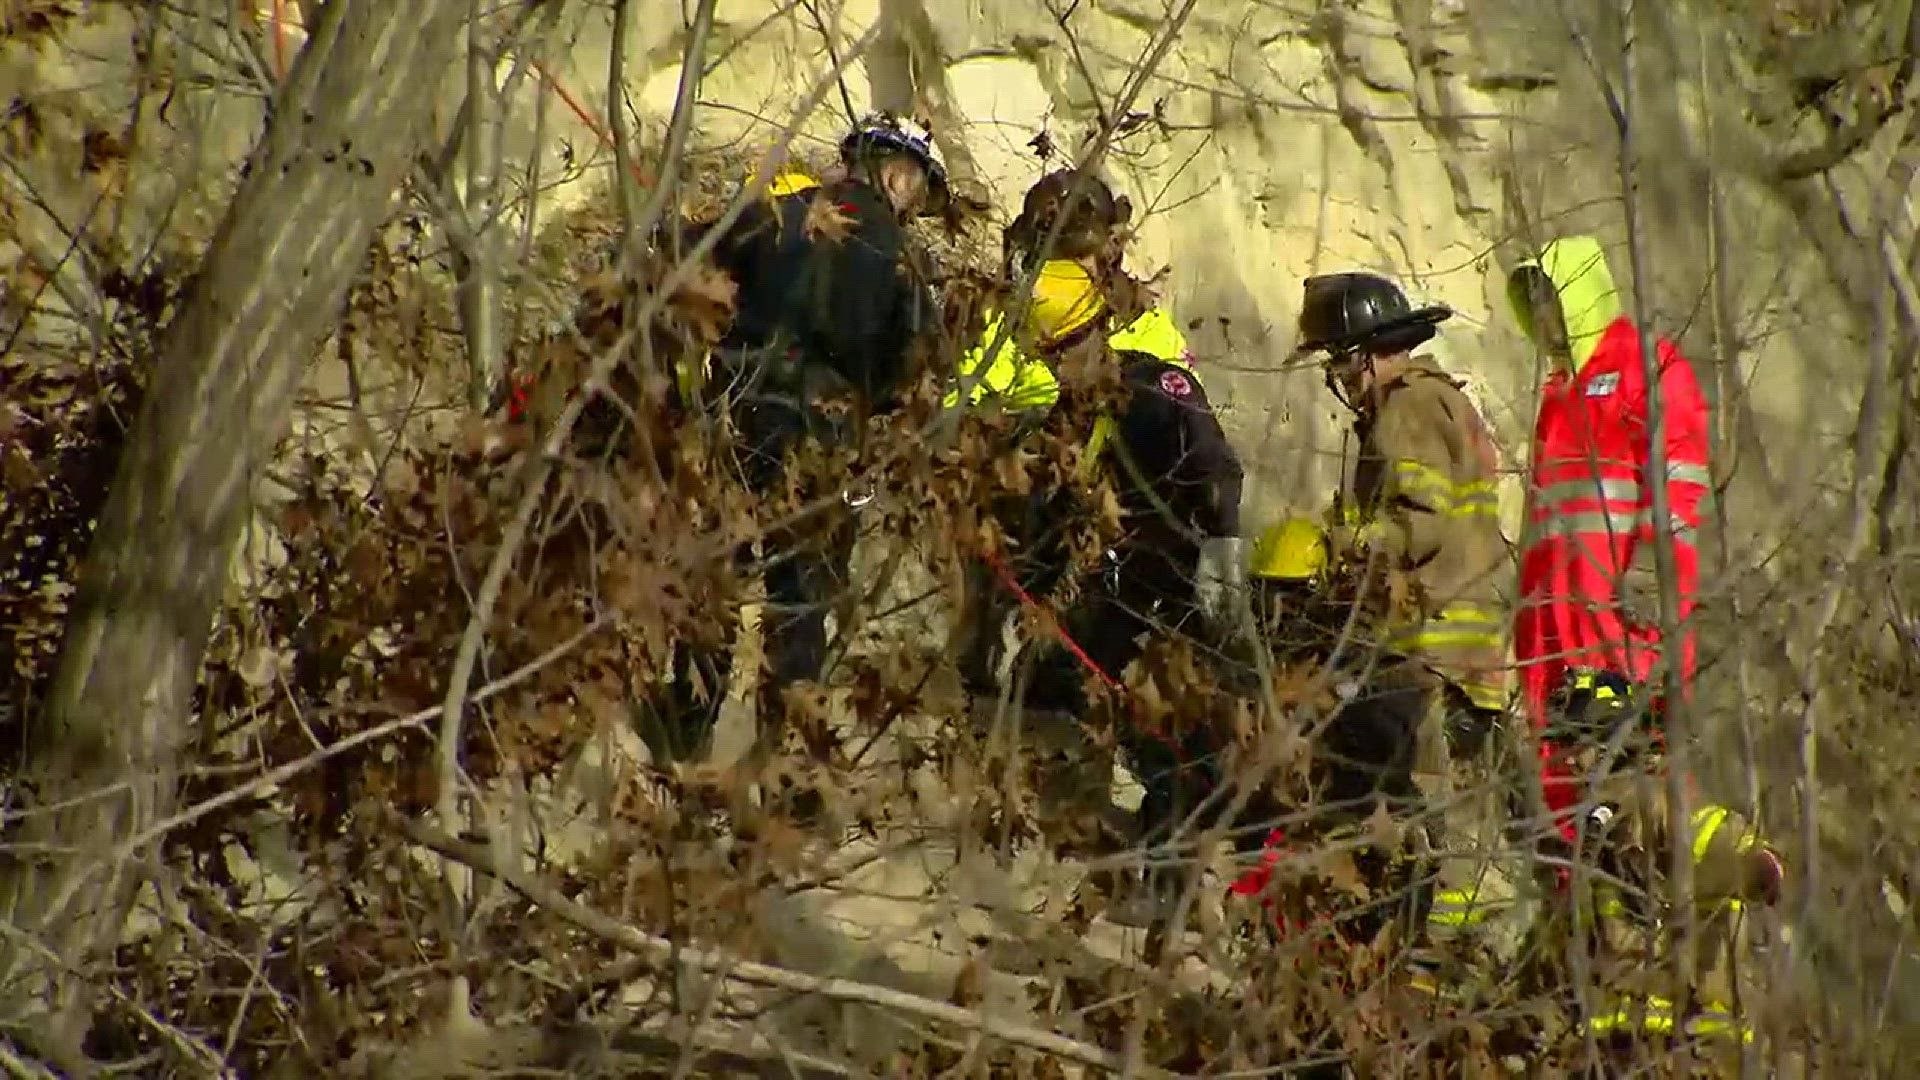 The St. Paul Fire Department technical rescue team was forced into action late Tuesday morning after a group of young rouge explorers was seen entering a cave on the banks of the Mississippi River Tuesday.